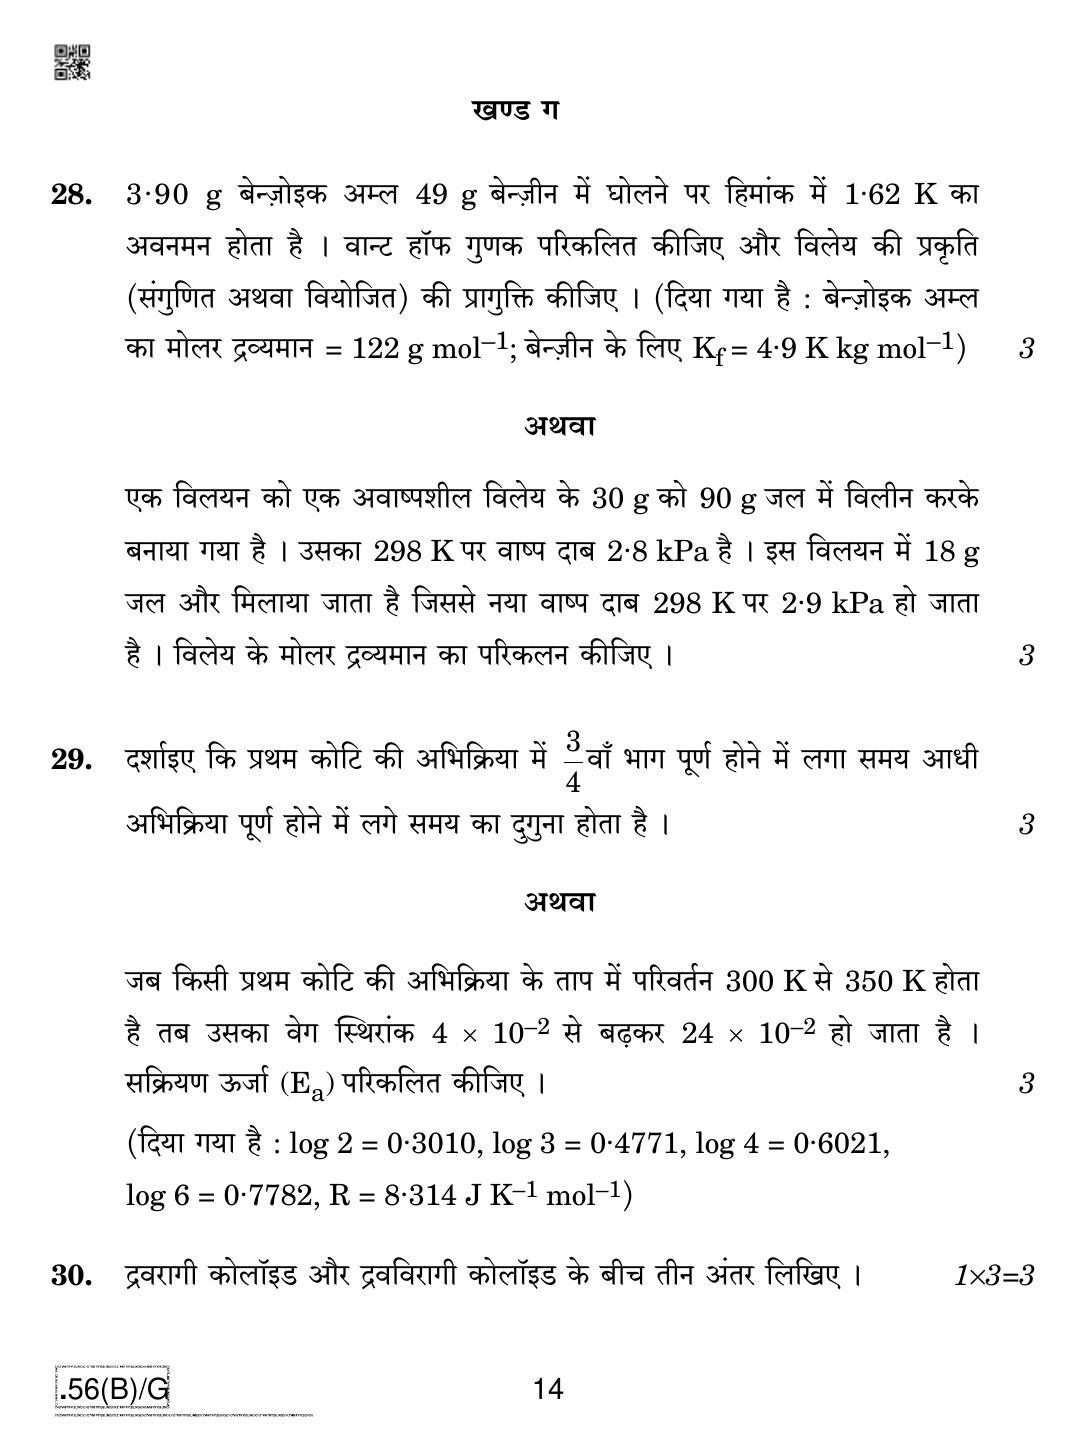 CBSE Class 12 56(B)-C - Chemistry For Blind Candidates 2020 Compartment Question Paper - Page 14